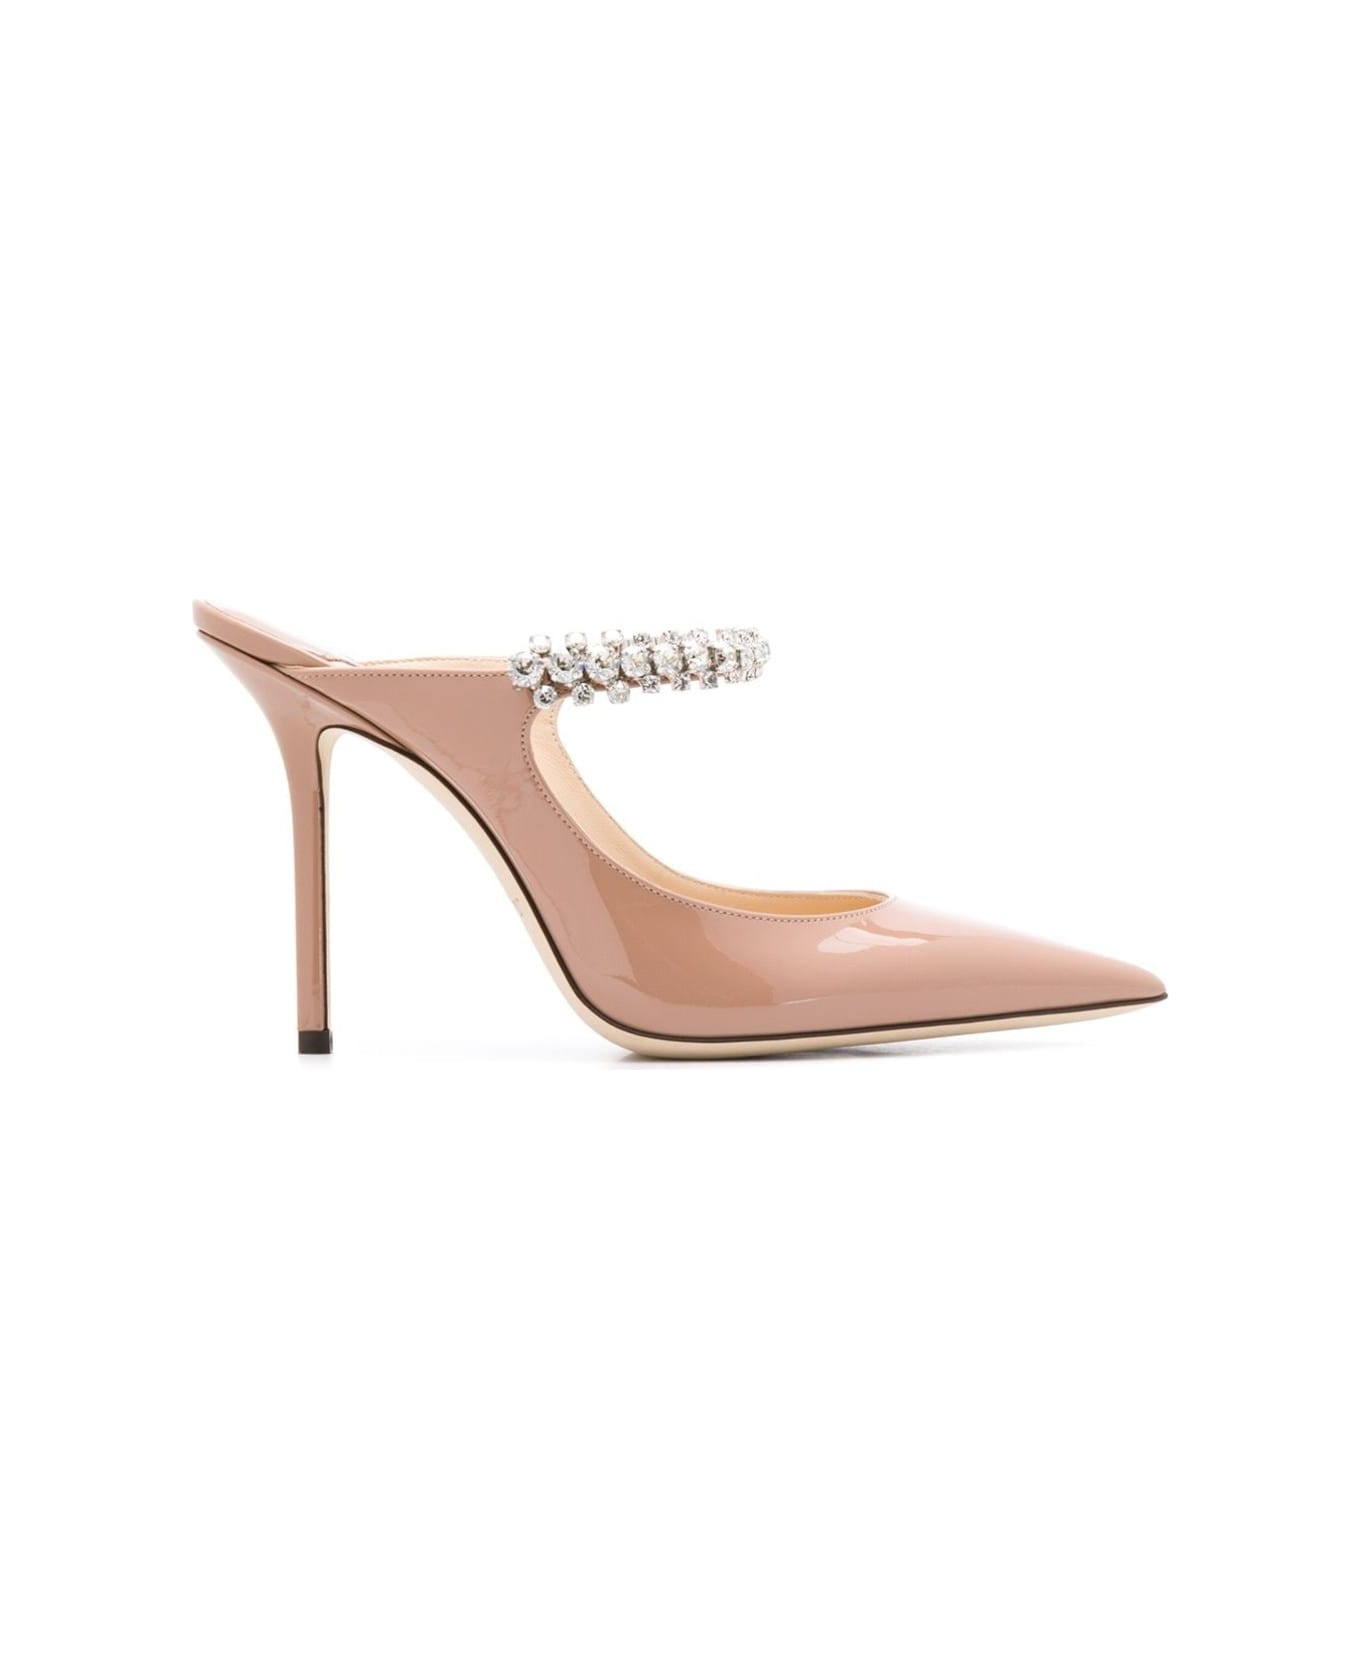 Jimmy Choo Woman's Pink Patent Leather Pumps With Crystal Strap Detail - Ballet pink